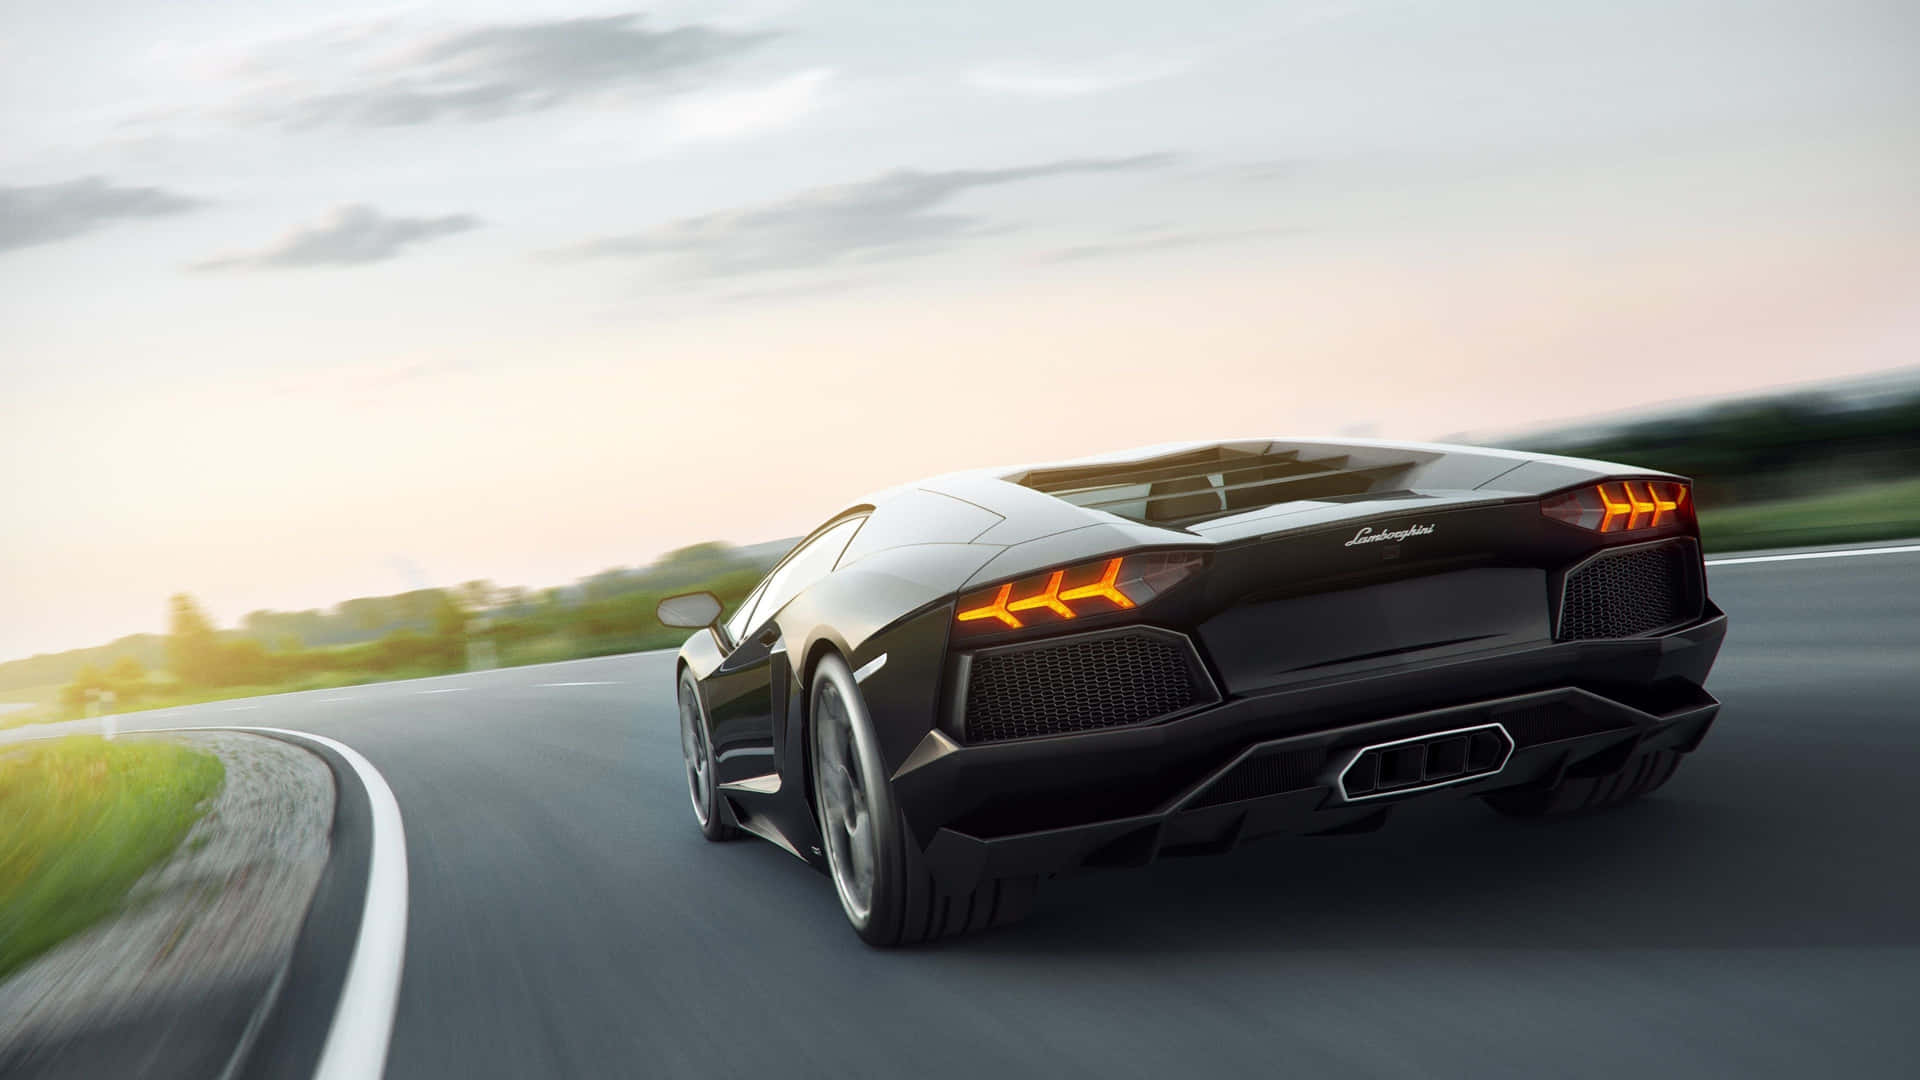 Experience the power of raw speed with this 4K Lamborghini.